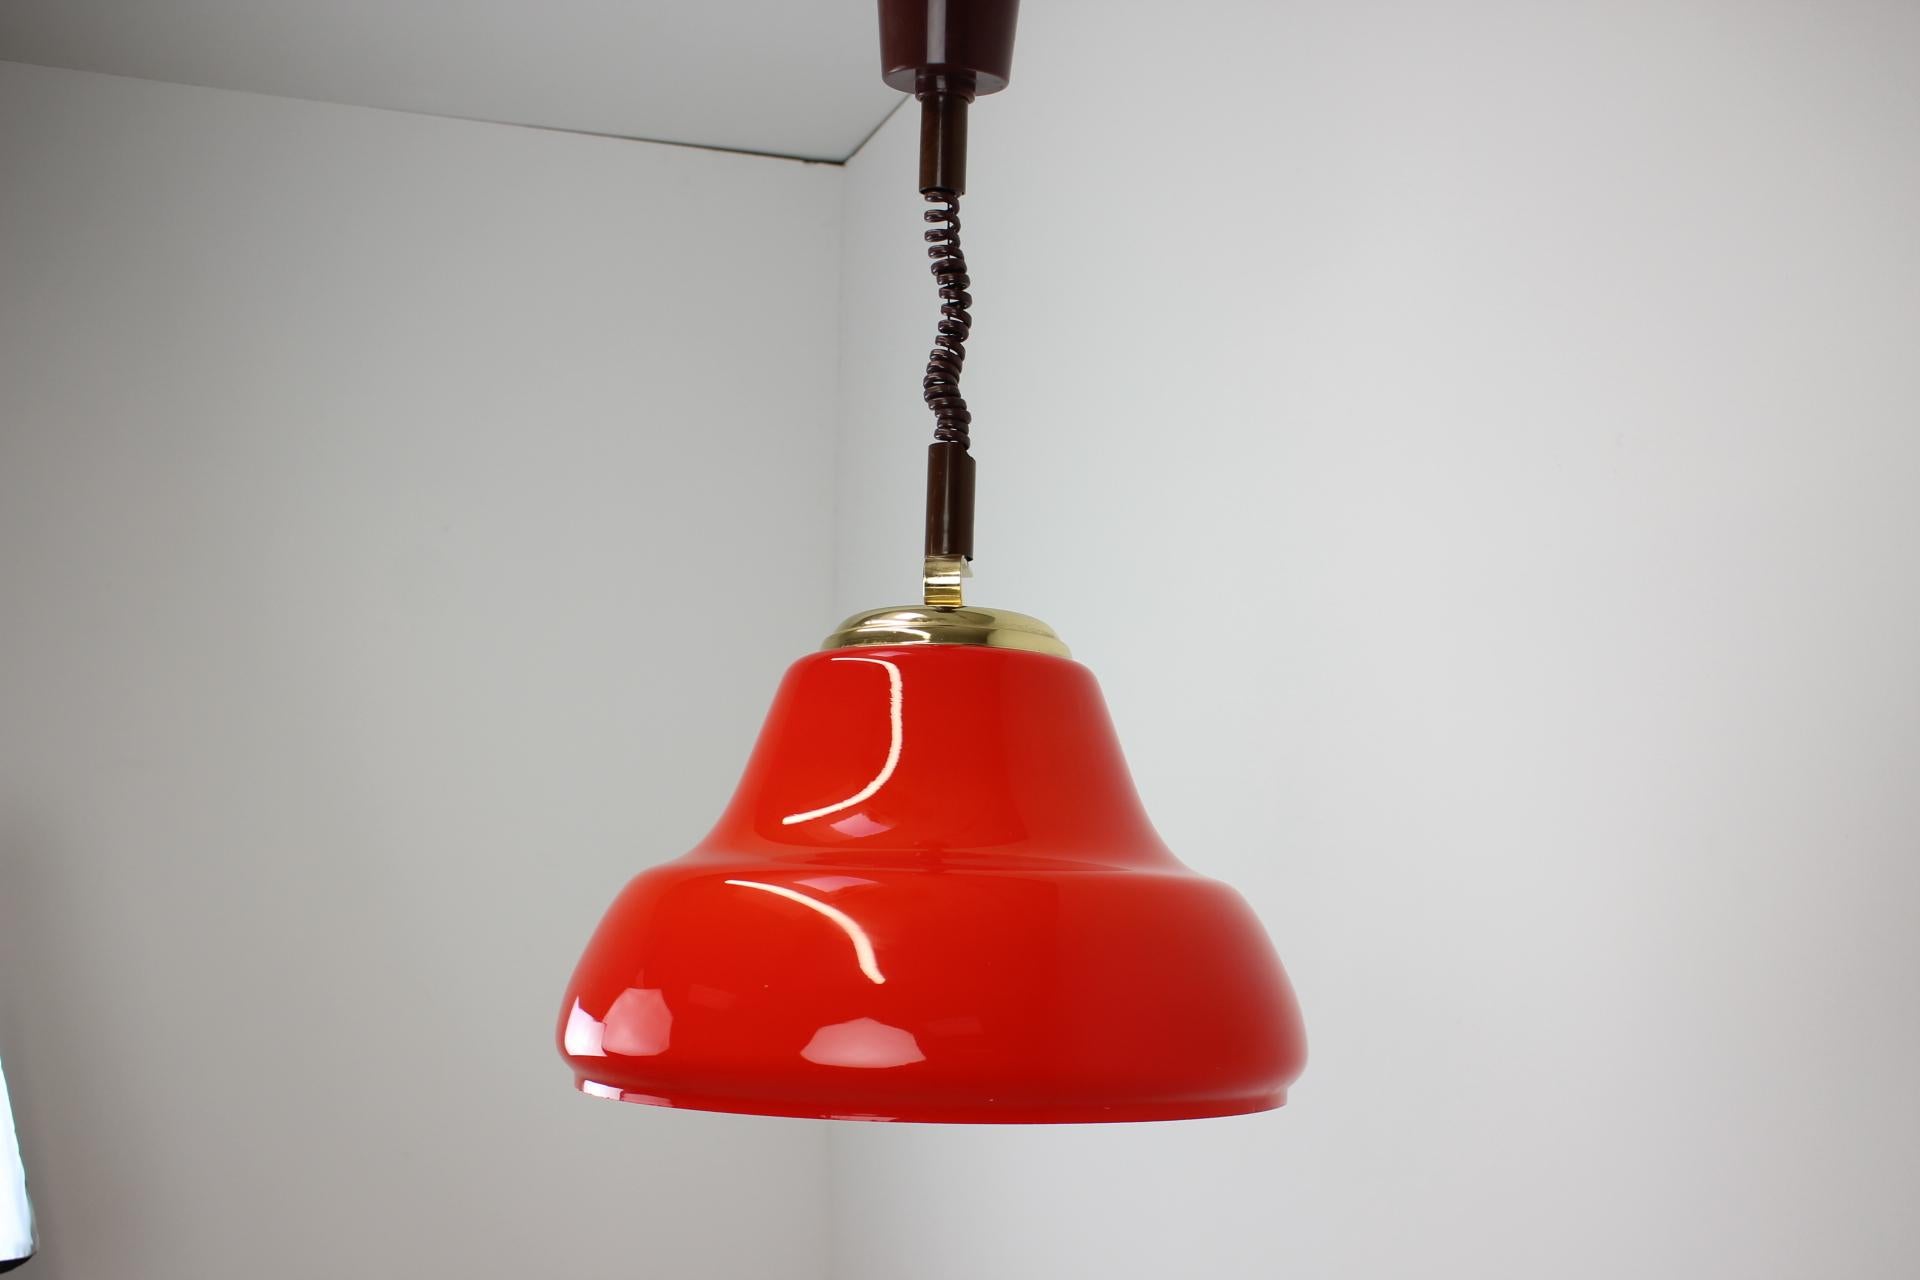 Beautiful red glass pendant.
Max height 126 cm, can be shortened on request.
1x60W, E25-E27 bulb
US wiring compatible.